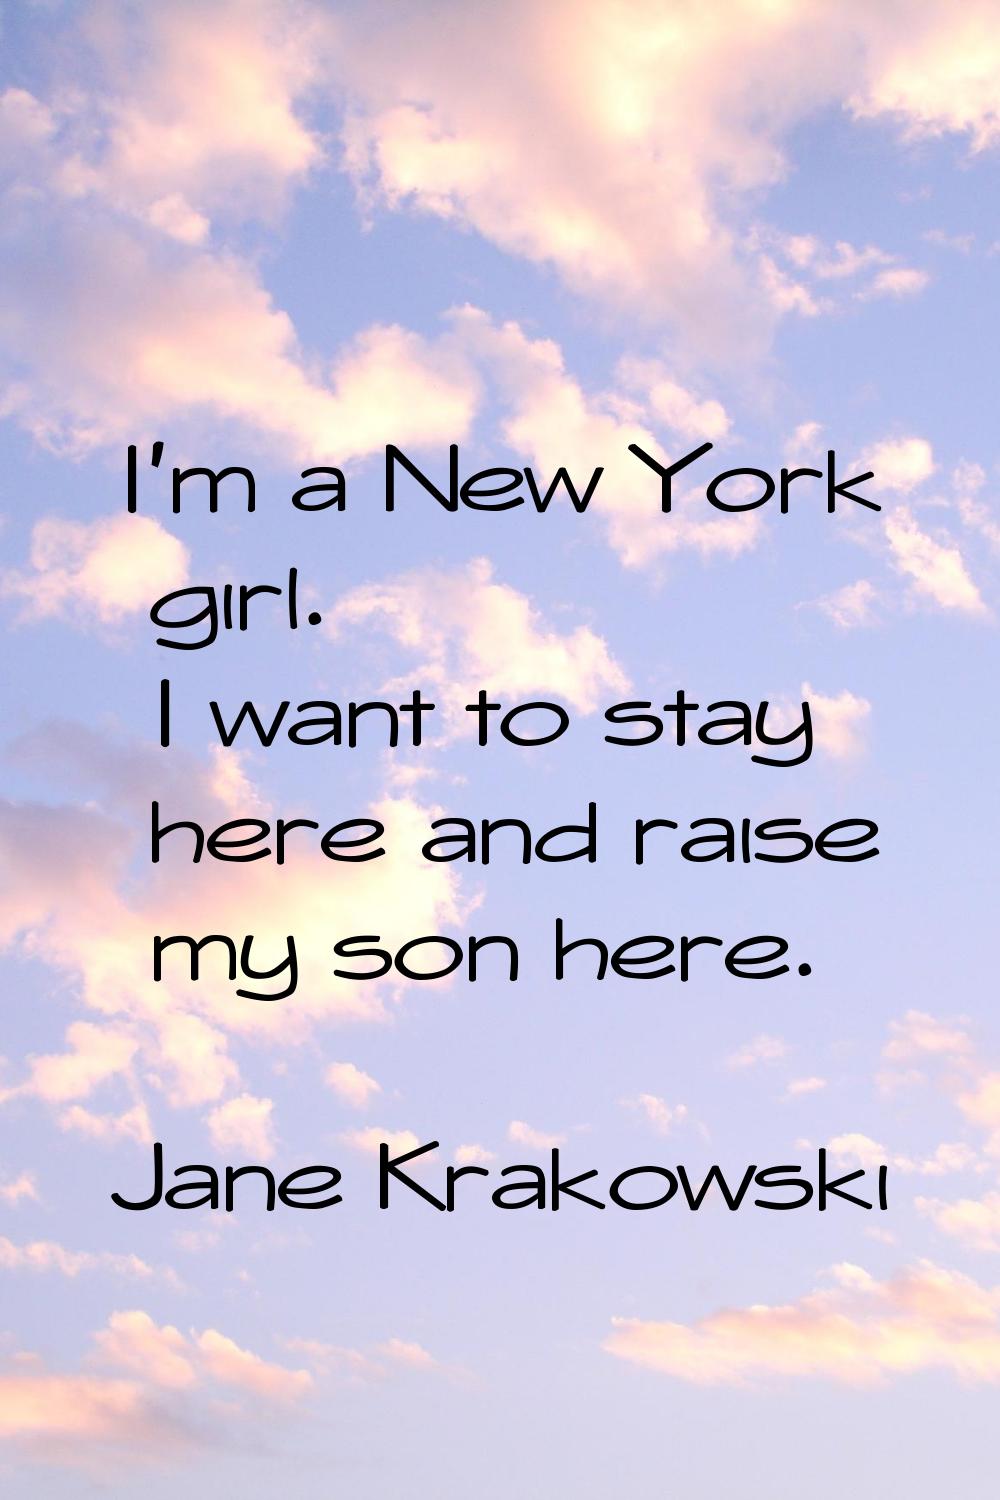 I'm a New York girl. I want to stay here and raise my son here.